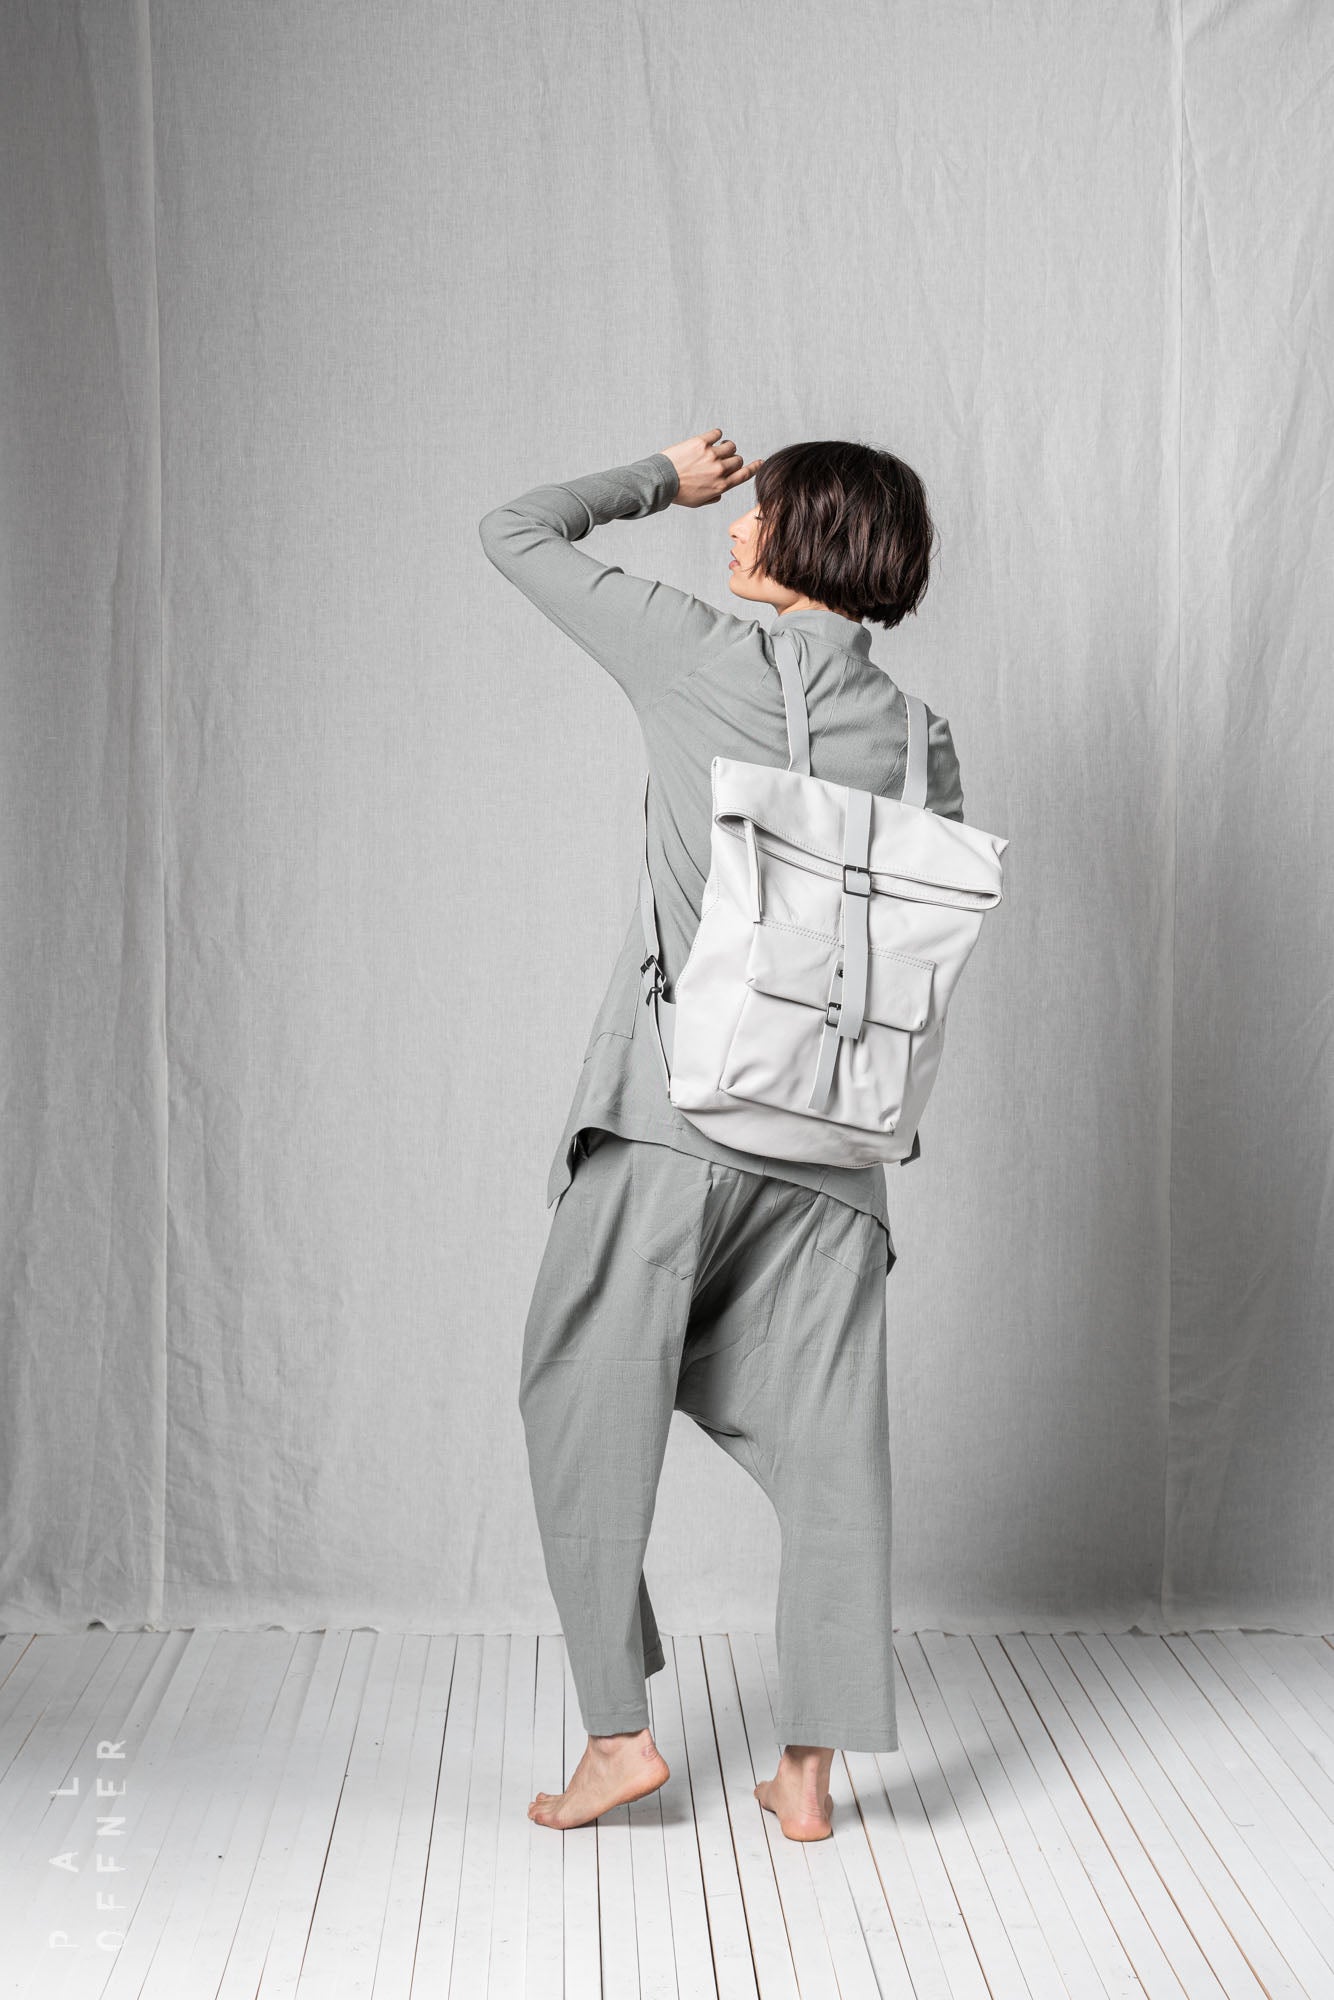 City Backpack_Leather